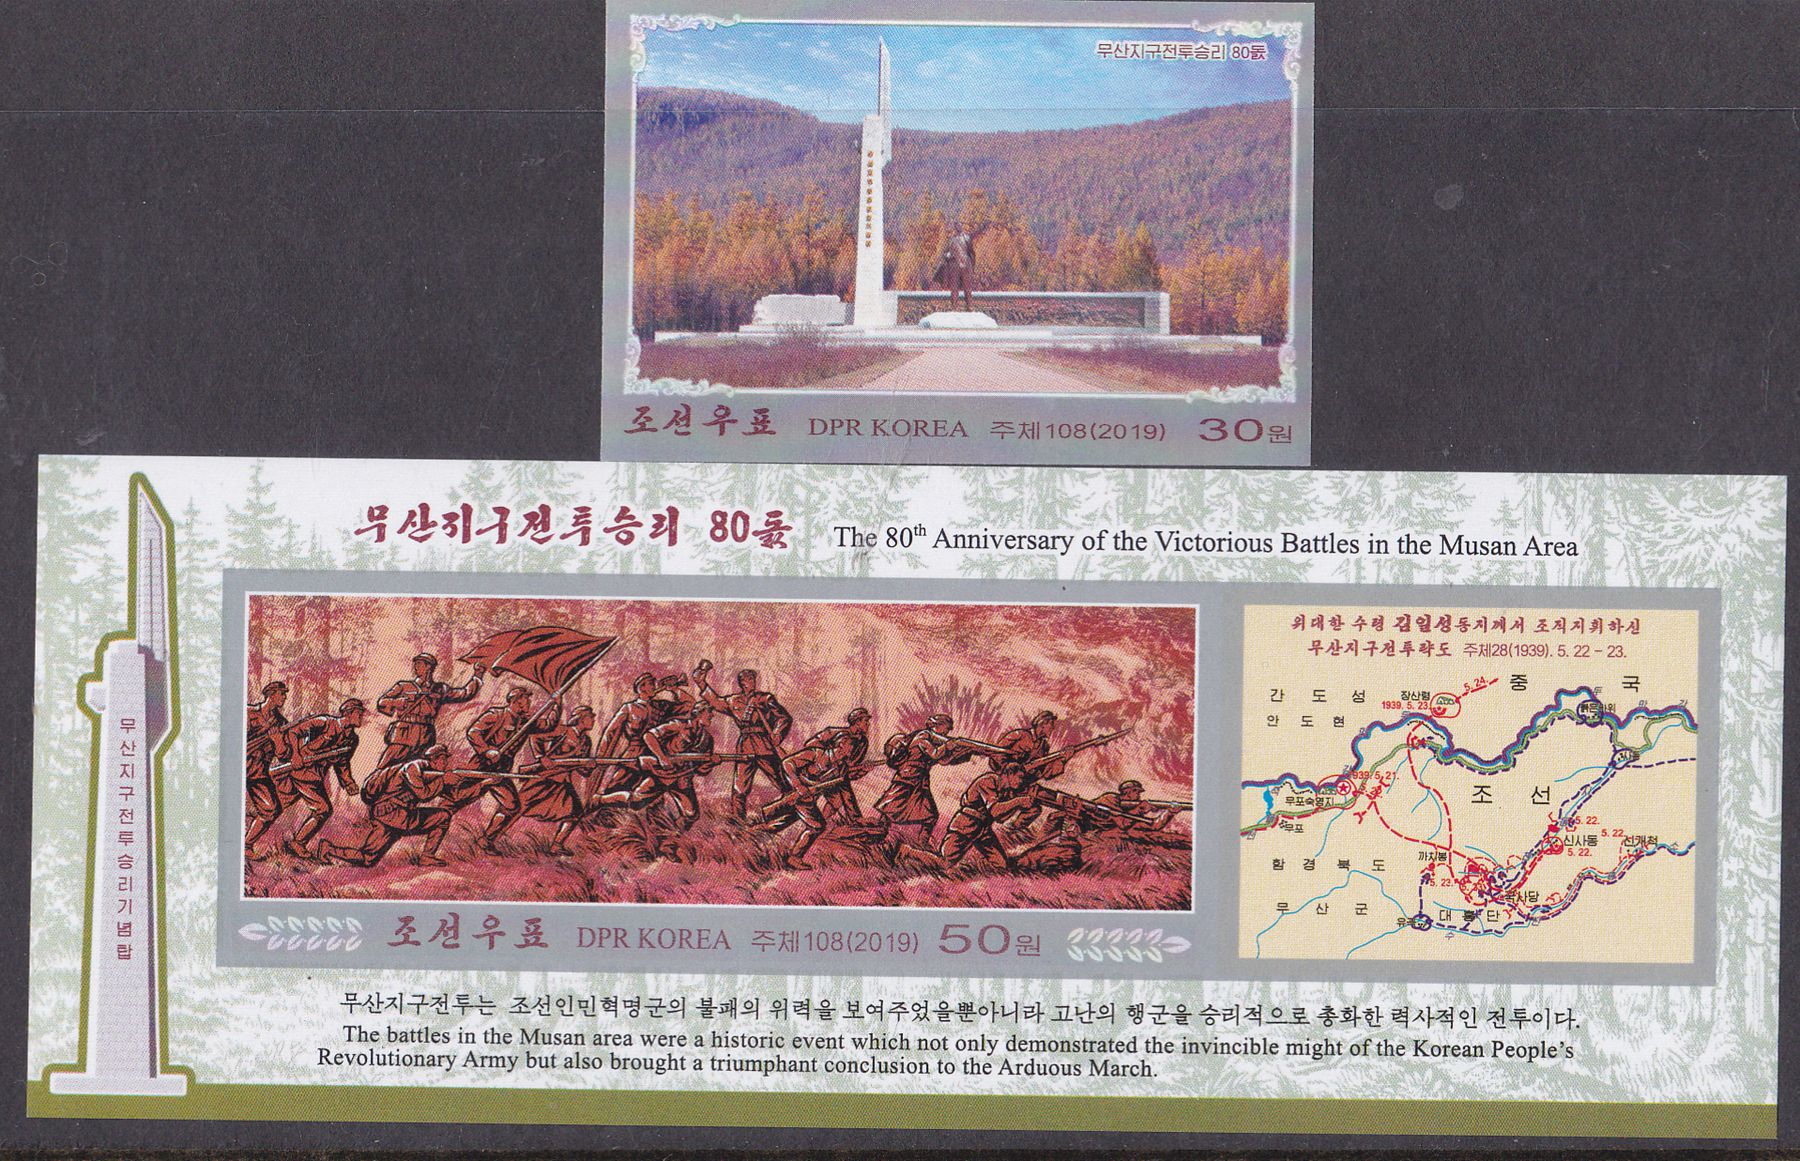 L4727, Korea "Victorious Battles in Musan Area" 2 Pcs Stamps, 2019 Imperforate